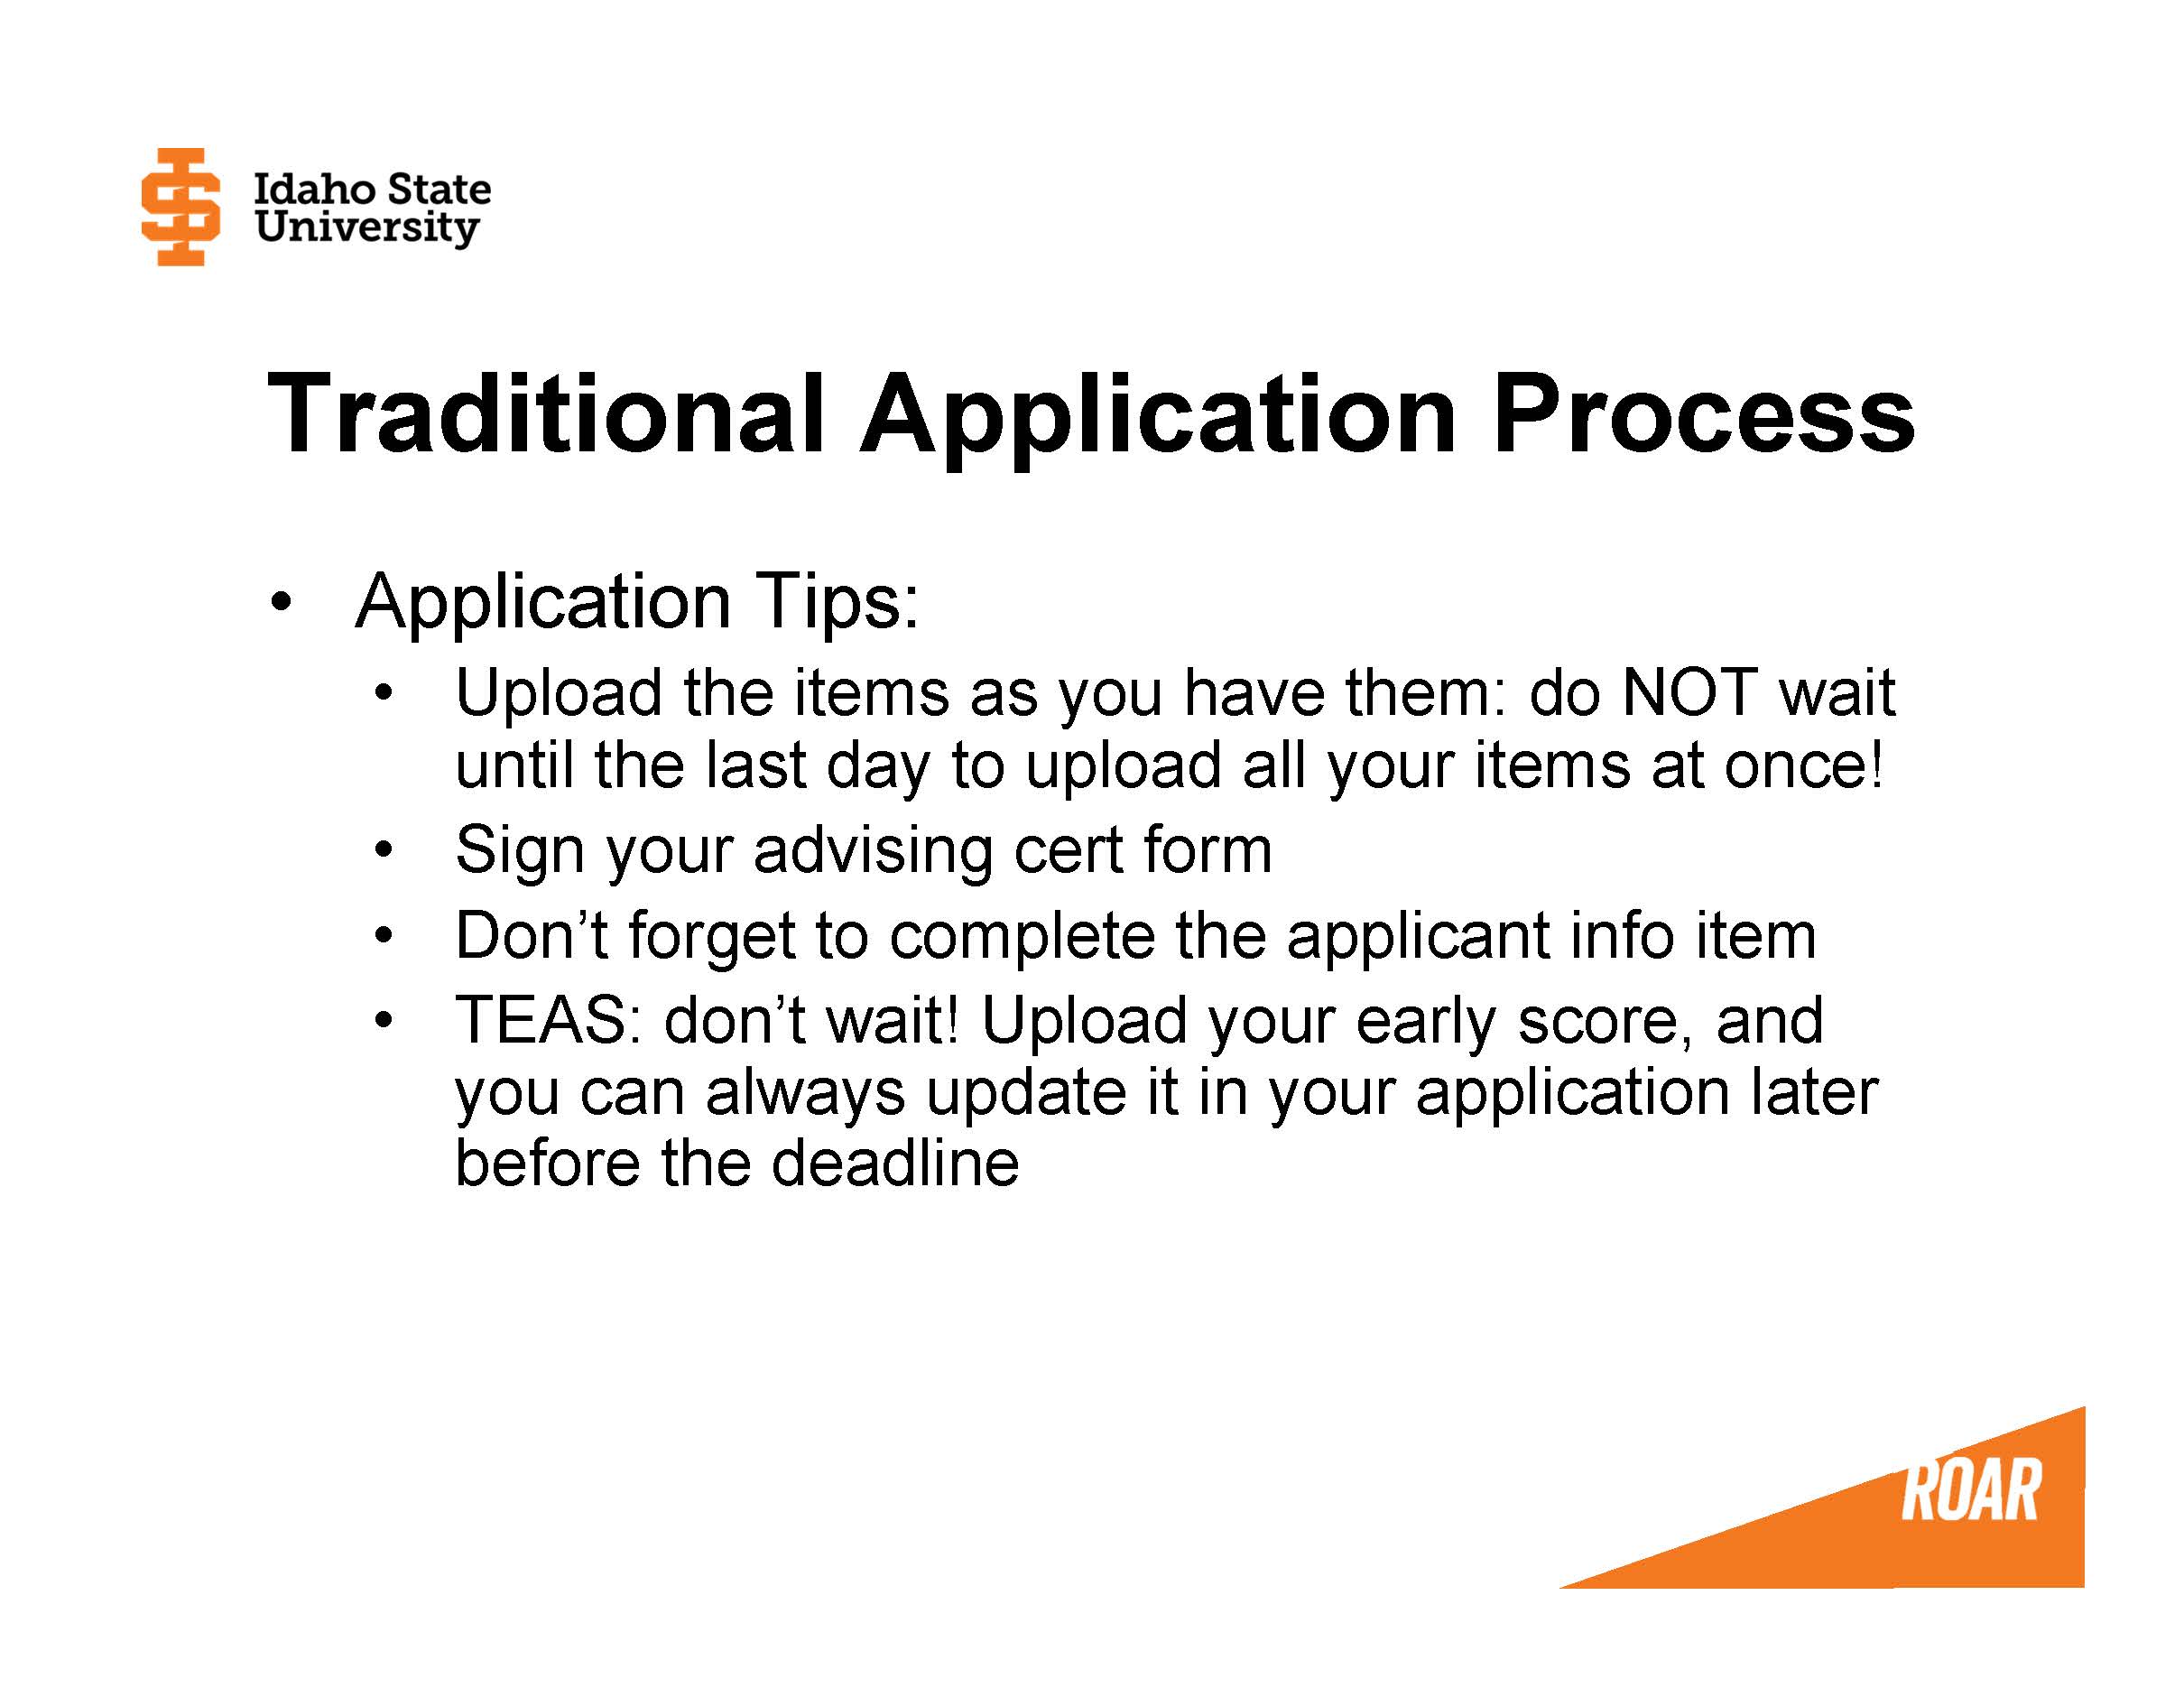 Application Tips: – Upload the items as you have them: do NOT wait until the last day to upload all your items at once! – Sign your advising cert form – Don’t forget to complete the applicant info item – TEAS: don’t wait! Upload your early score, and you can always update it in your application later before the deadline